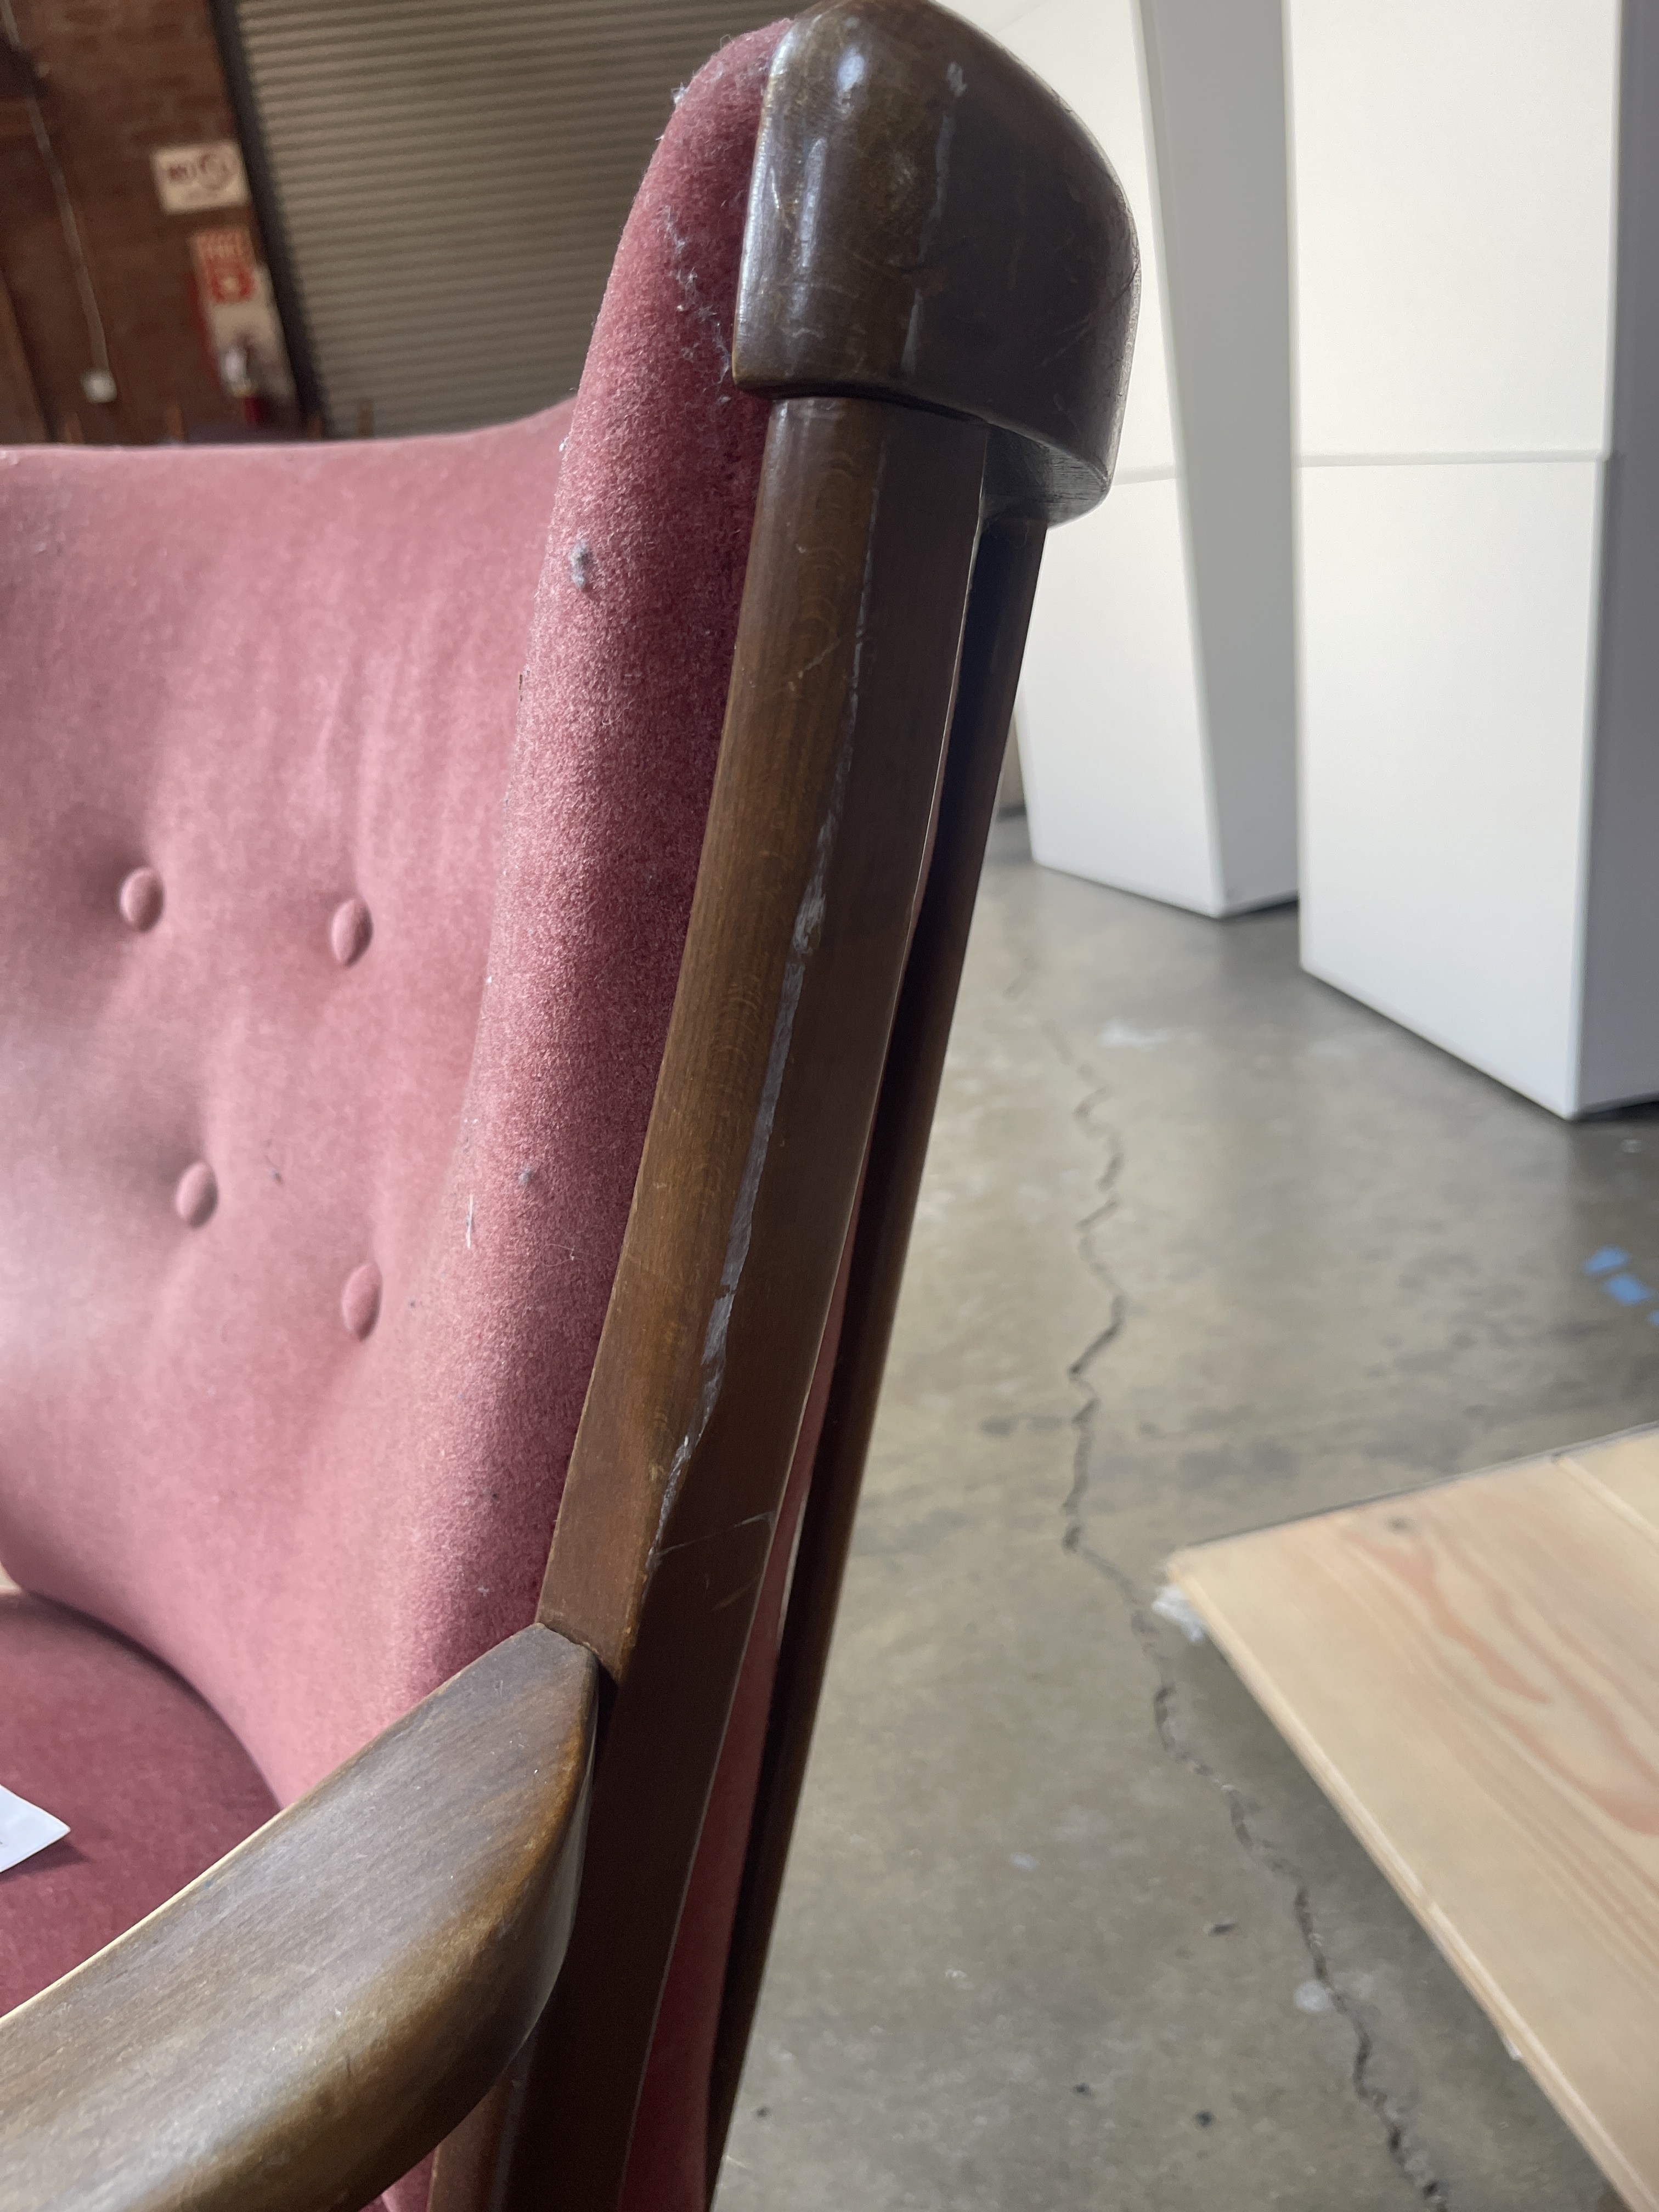 a pink chair with a wooden arm rest